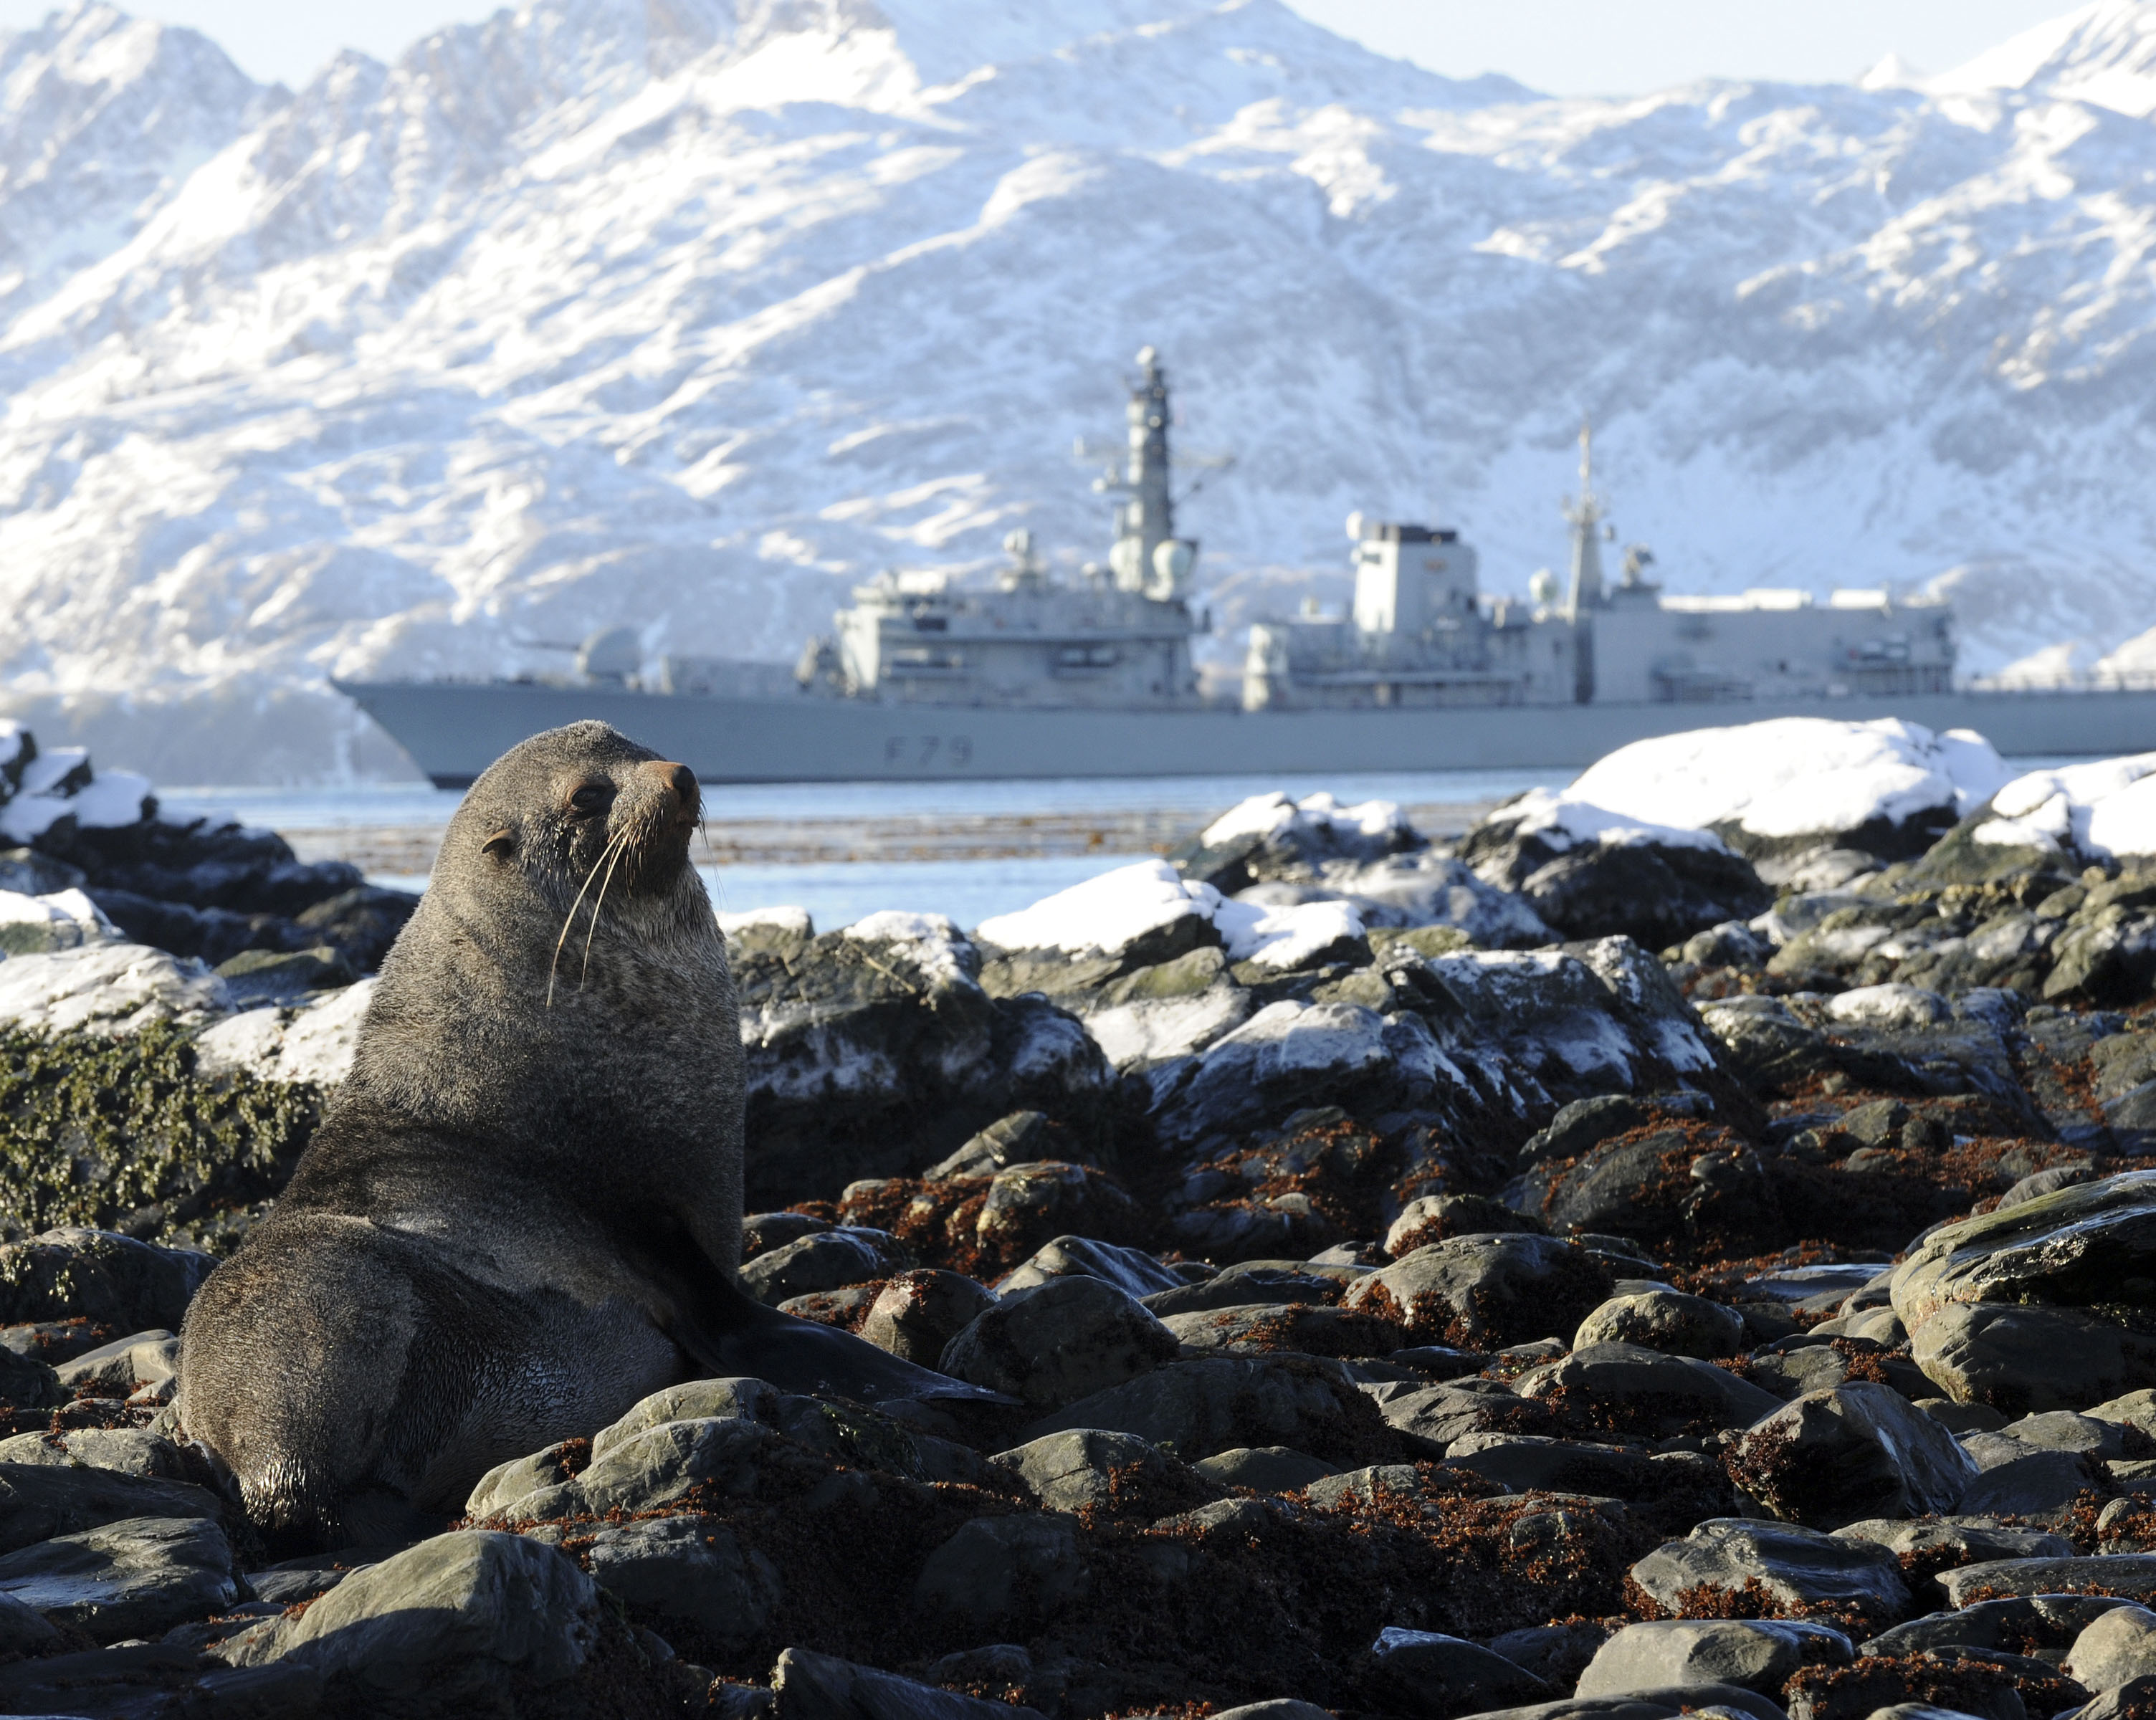 HMS Portland comes face to face with the remarkable size of the Nordenskjold Glacier in South Georgia and local wildlife